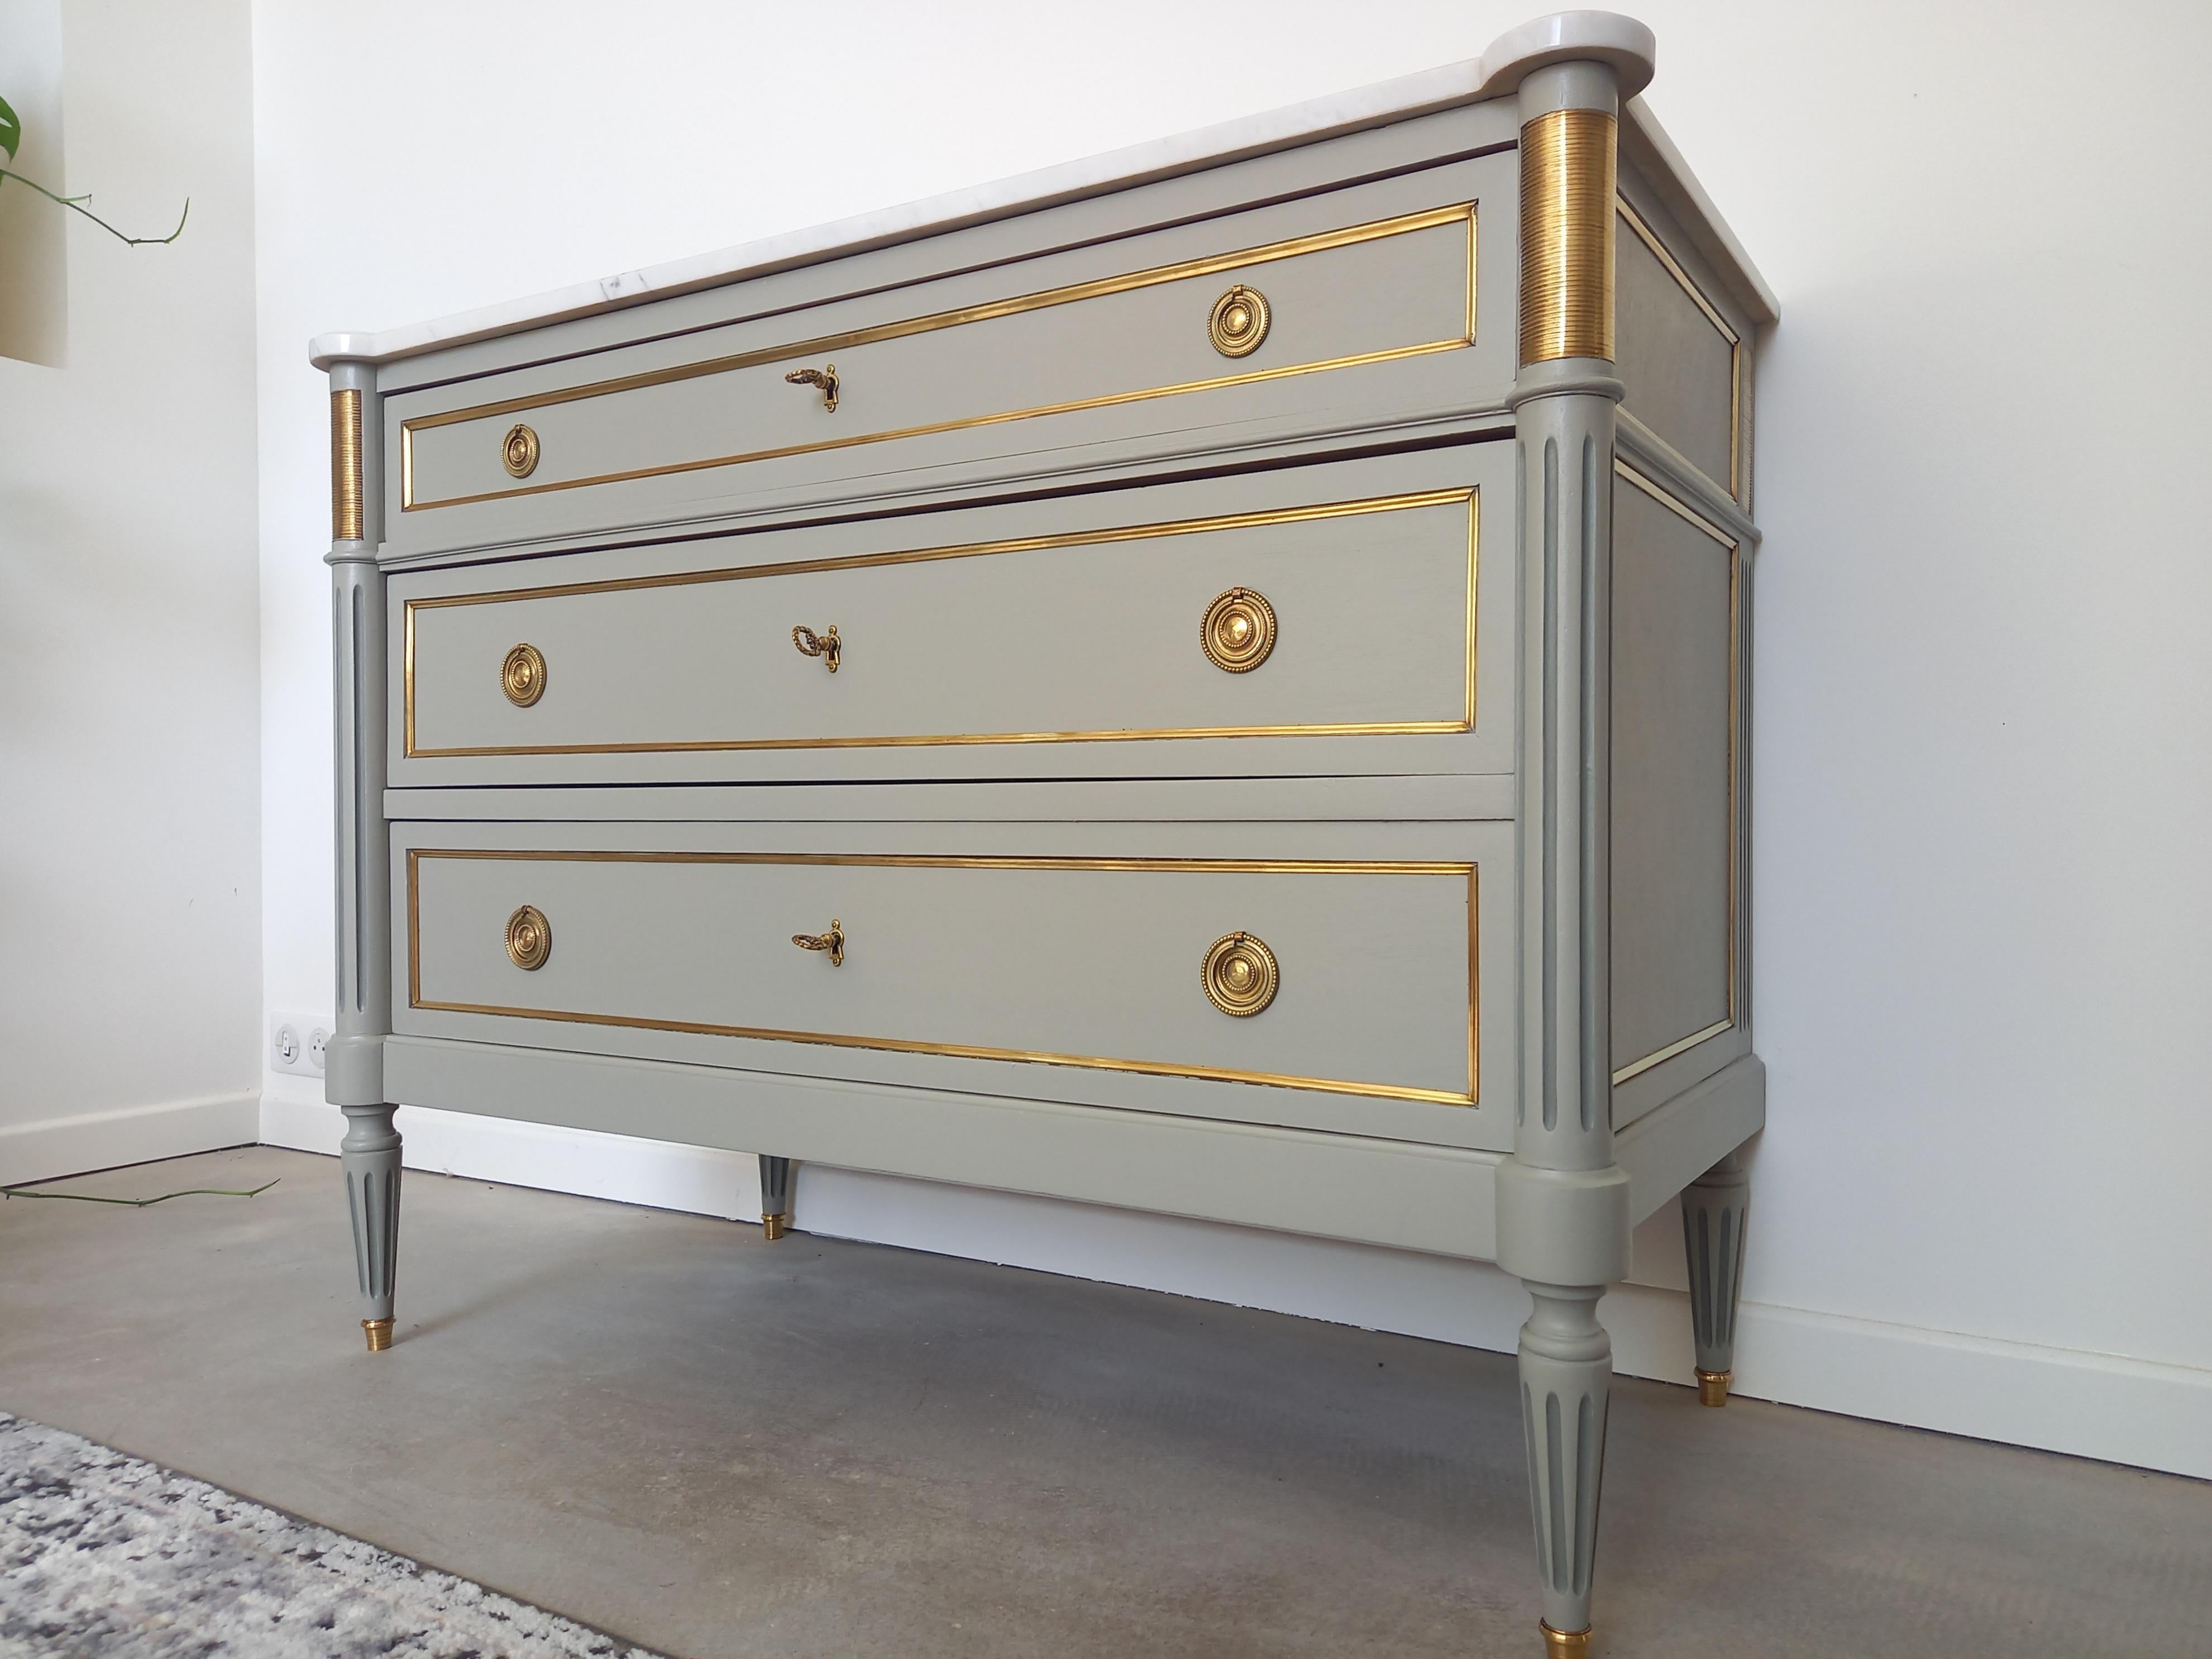 Antique French, Louis XVI style chest of drawers topped with a white Carrara marble, fluted legs finished with golden bronze clogs. 
Three dovetailed drawers with brass details, all the locks are functional and the keys are complete.
Impeccable